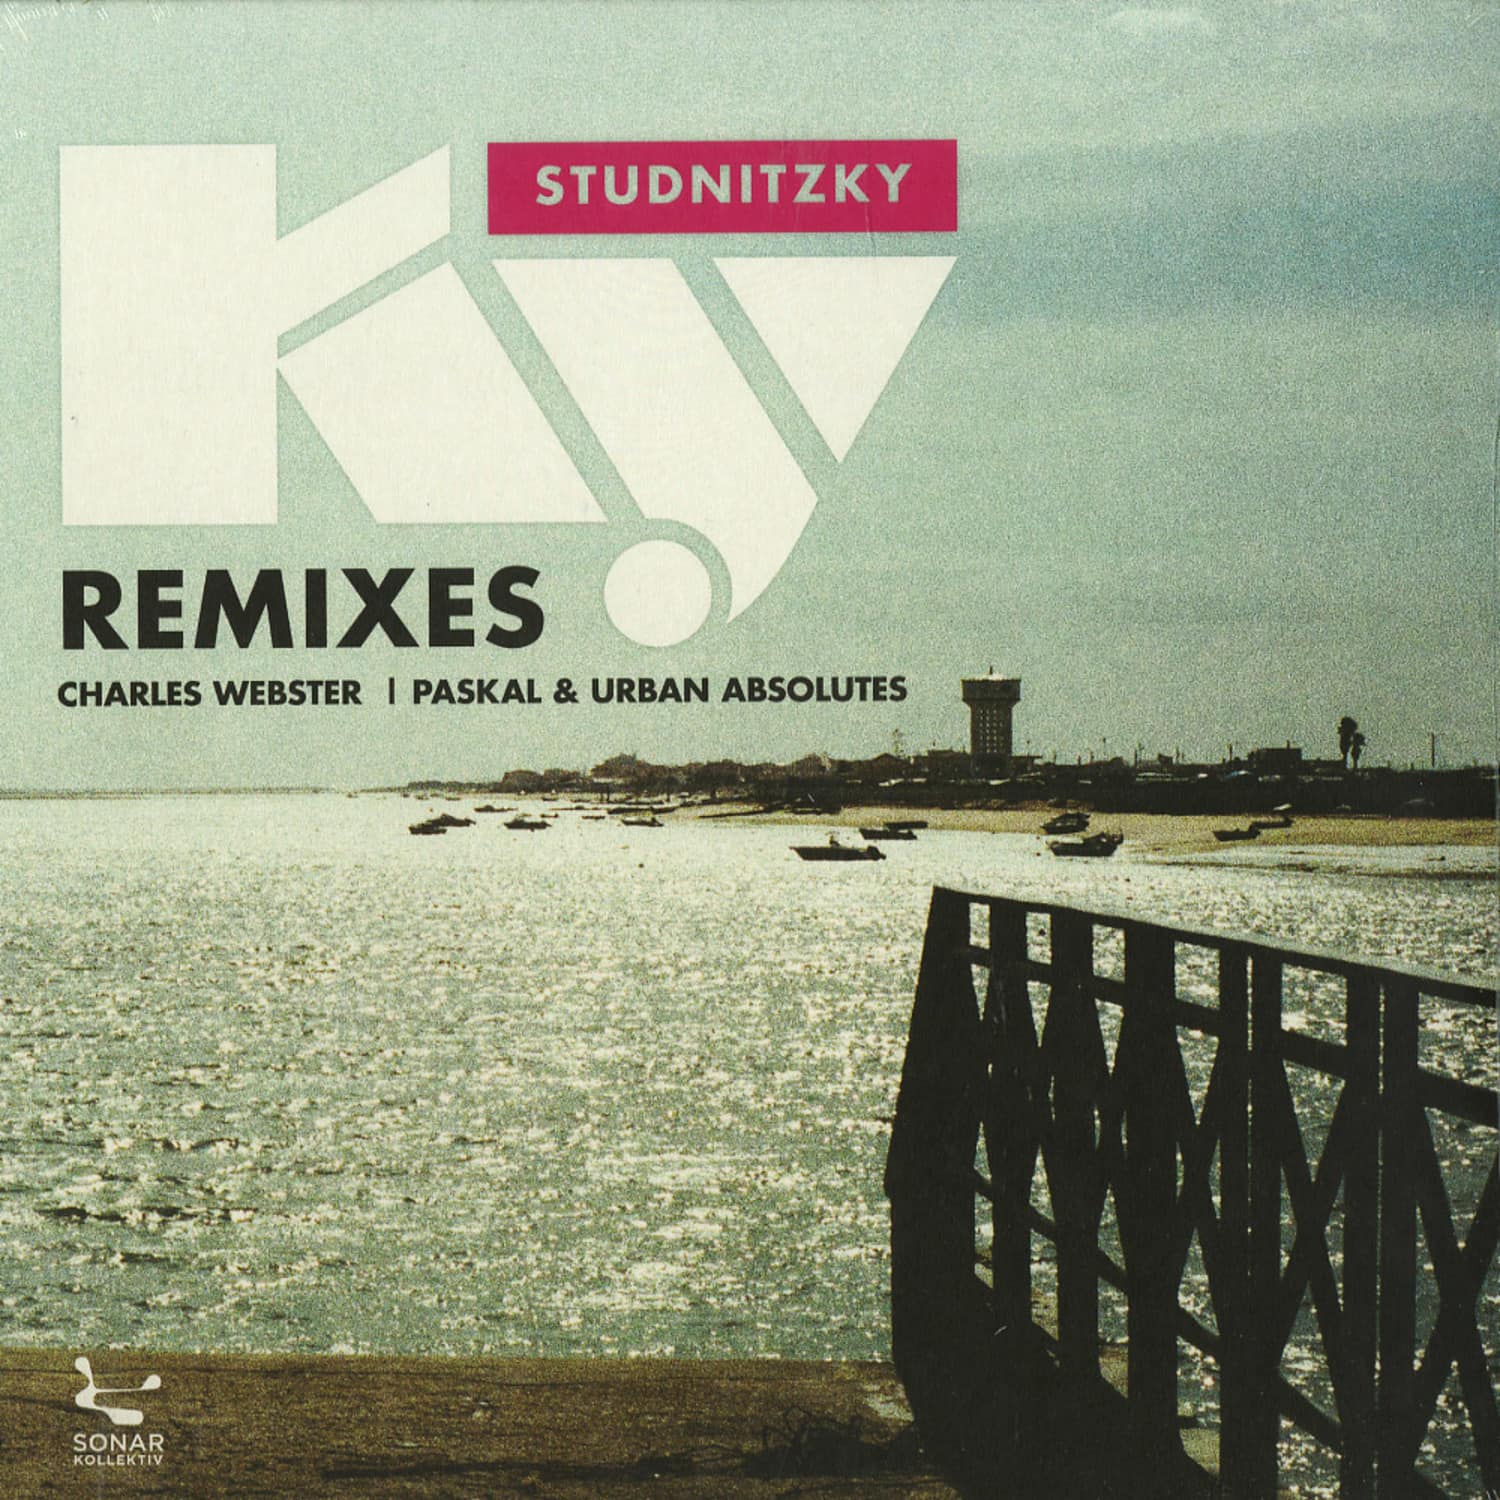 Studnitzky - CHARLES WEBSTER / PASKAL & URBAN ABSOLUTES REMIXES